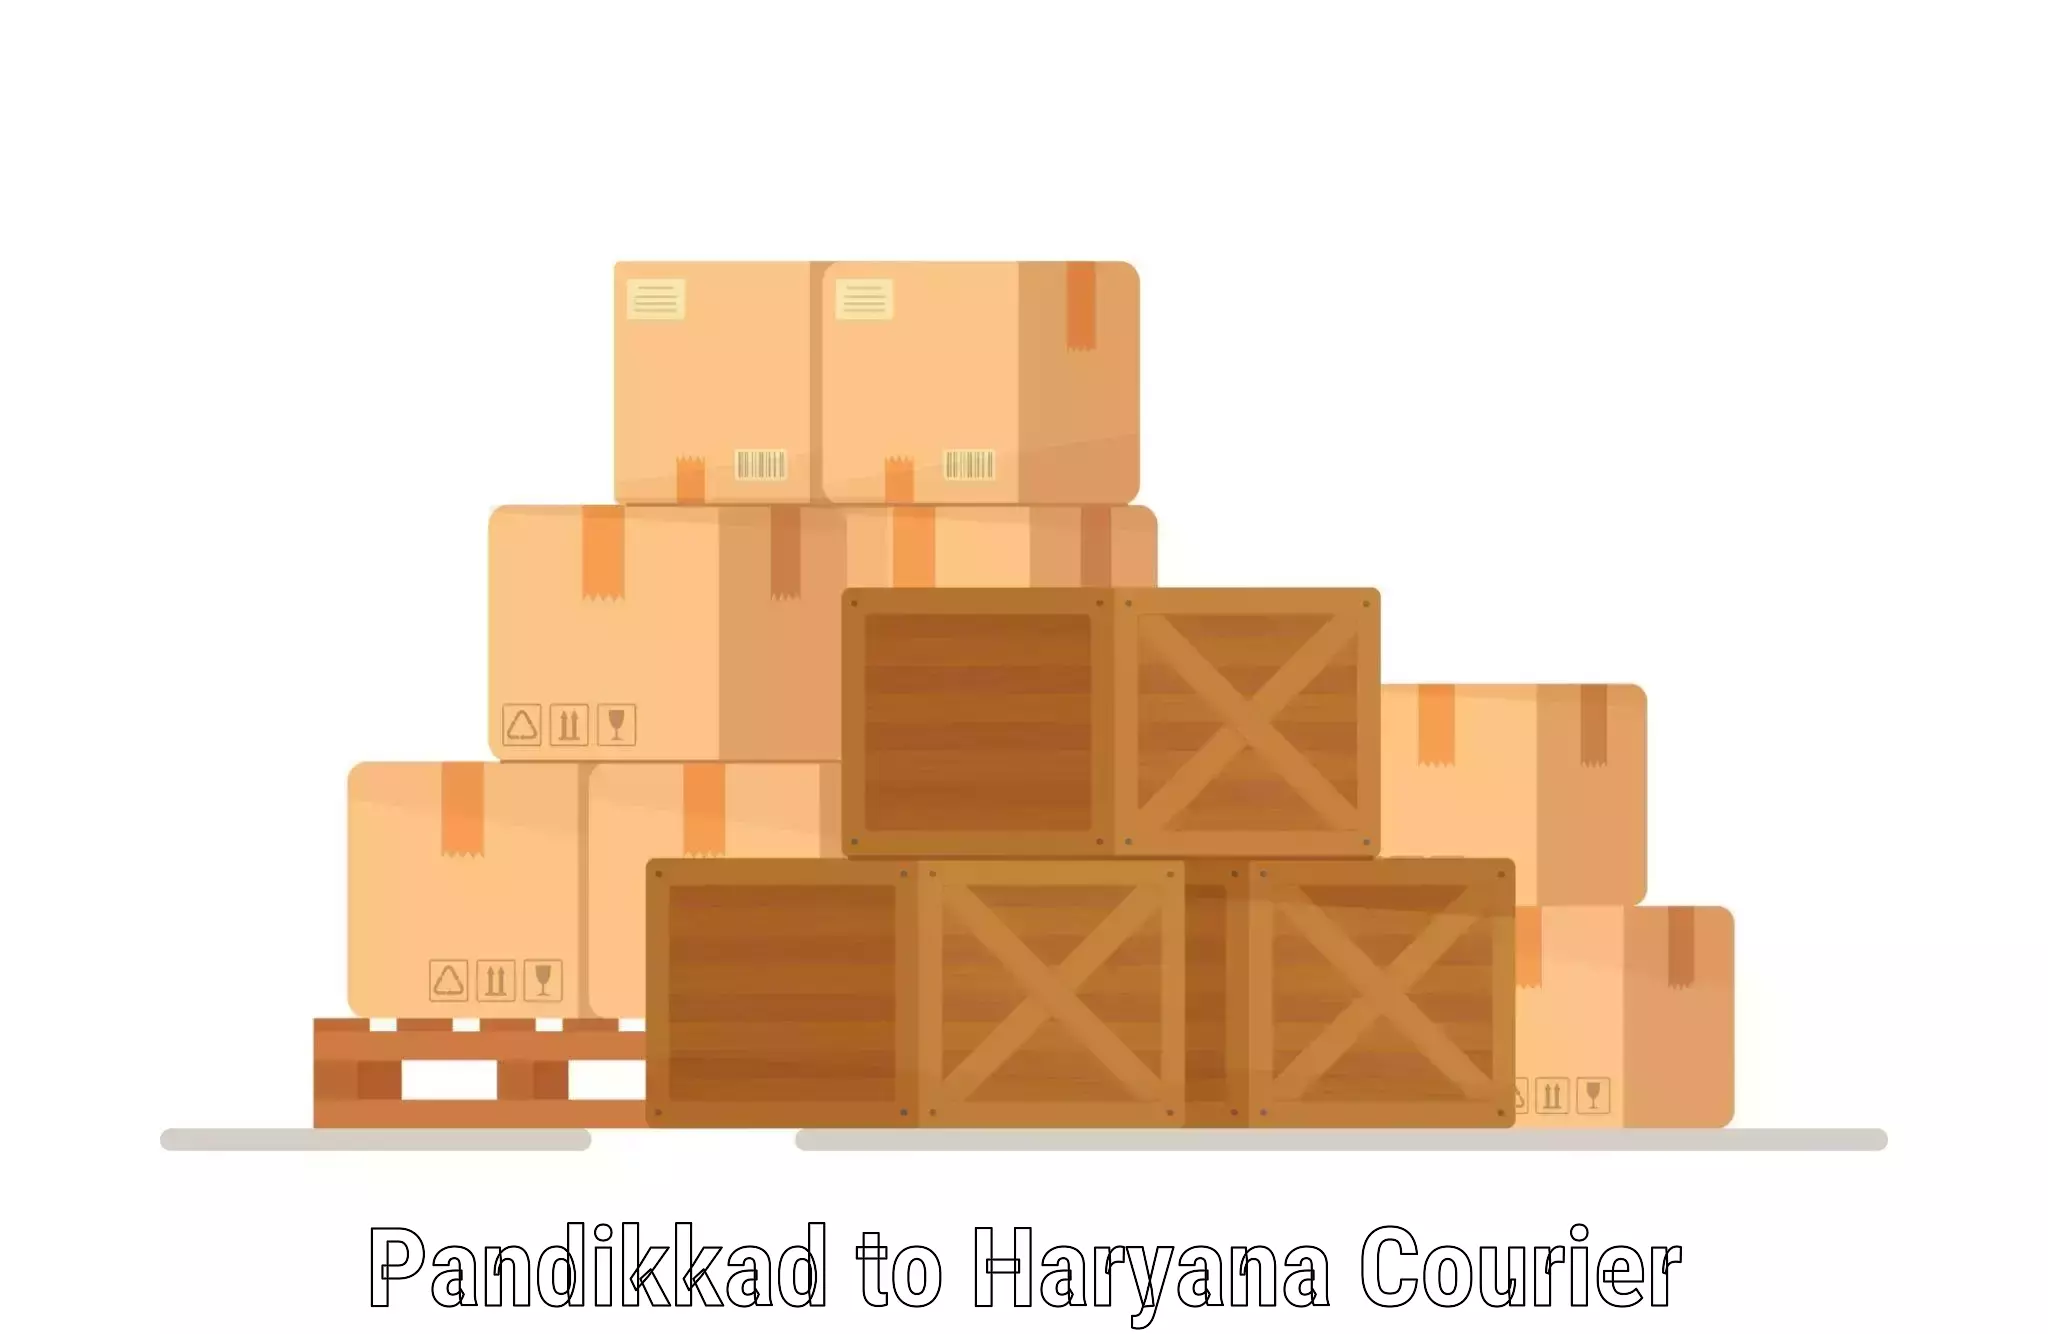 Streamlined delivery processes Pandikkad to Gurgaon